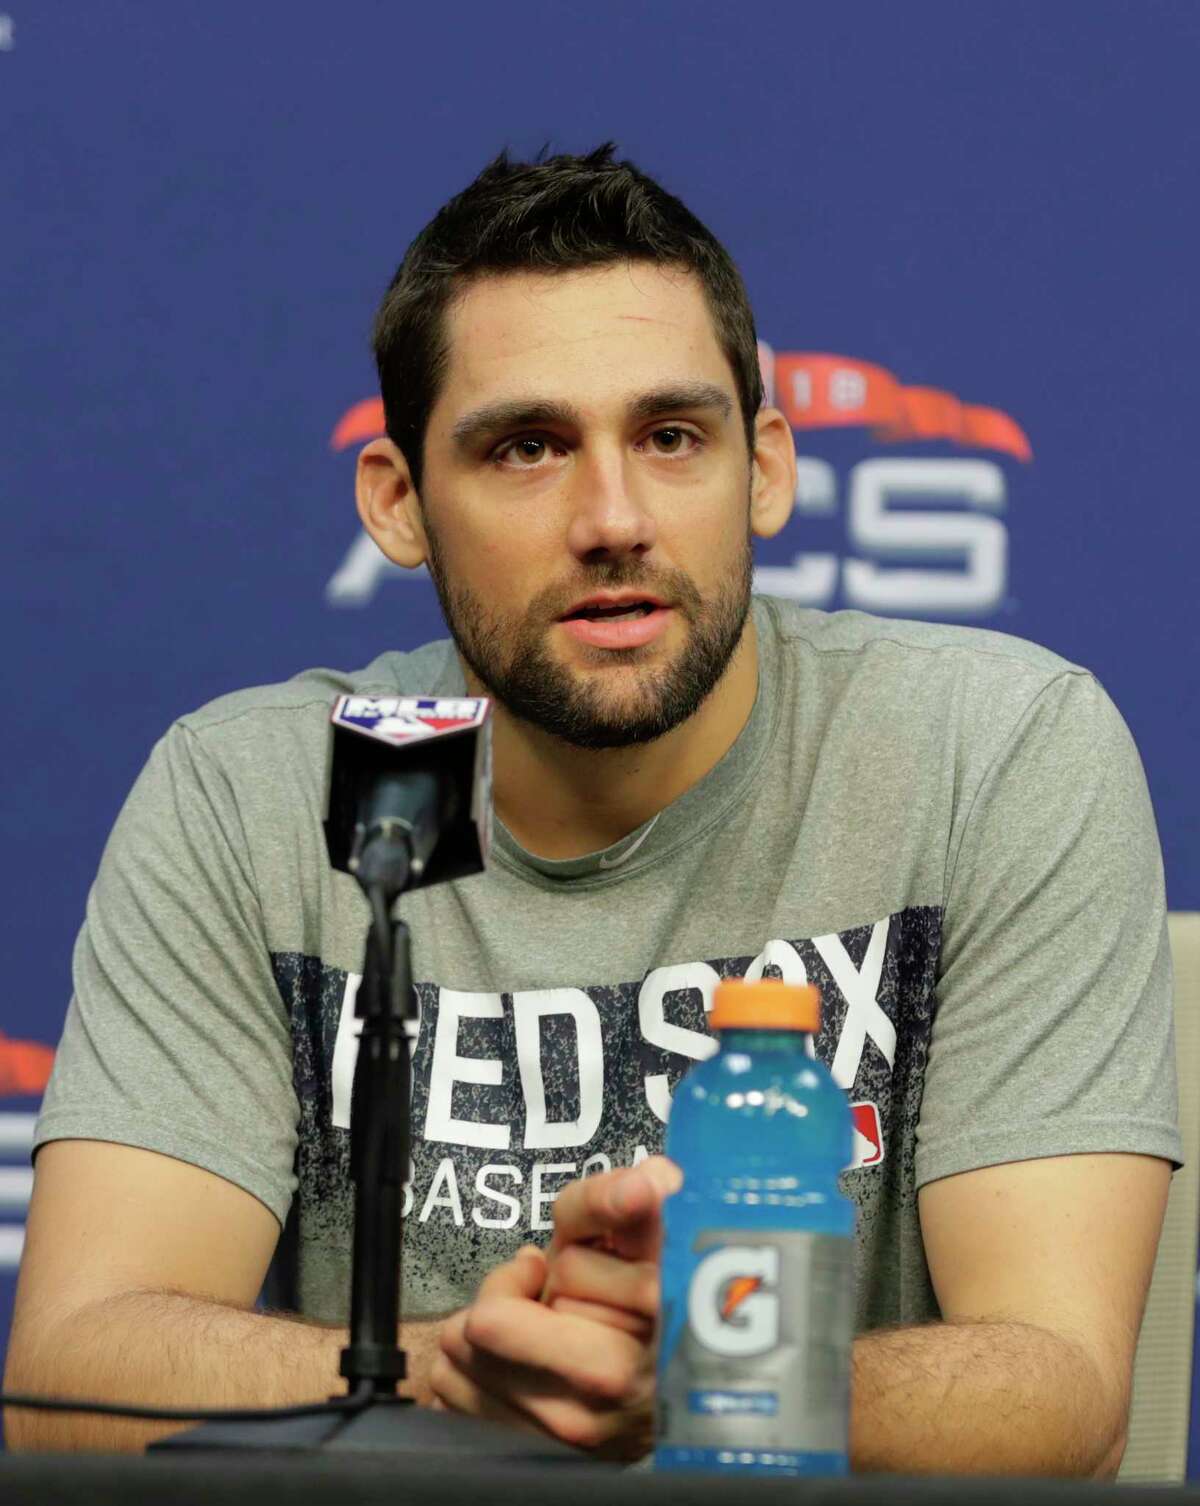 Nathan Eovaldi Ethnicity, What is Nathan Eovaldi's Ethnicity? - News